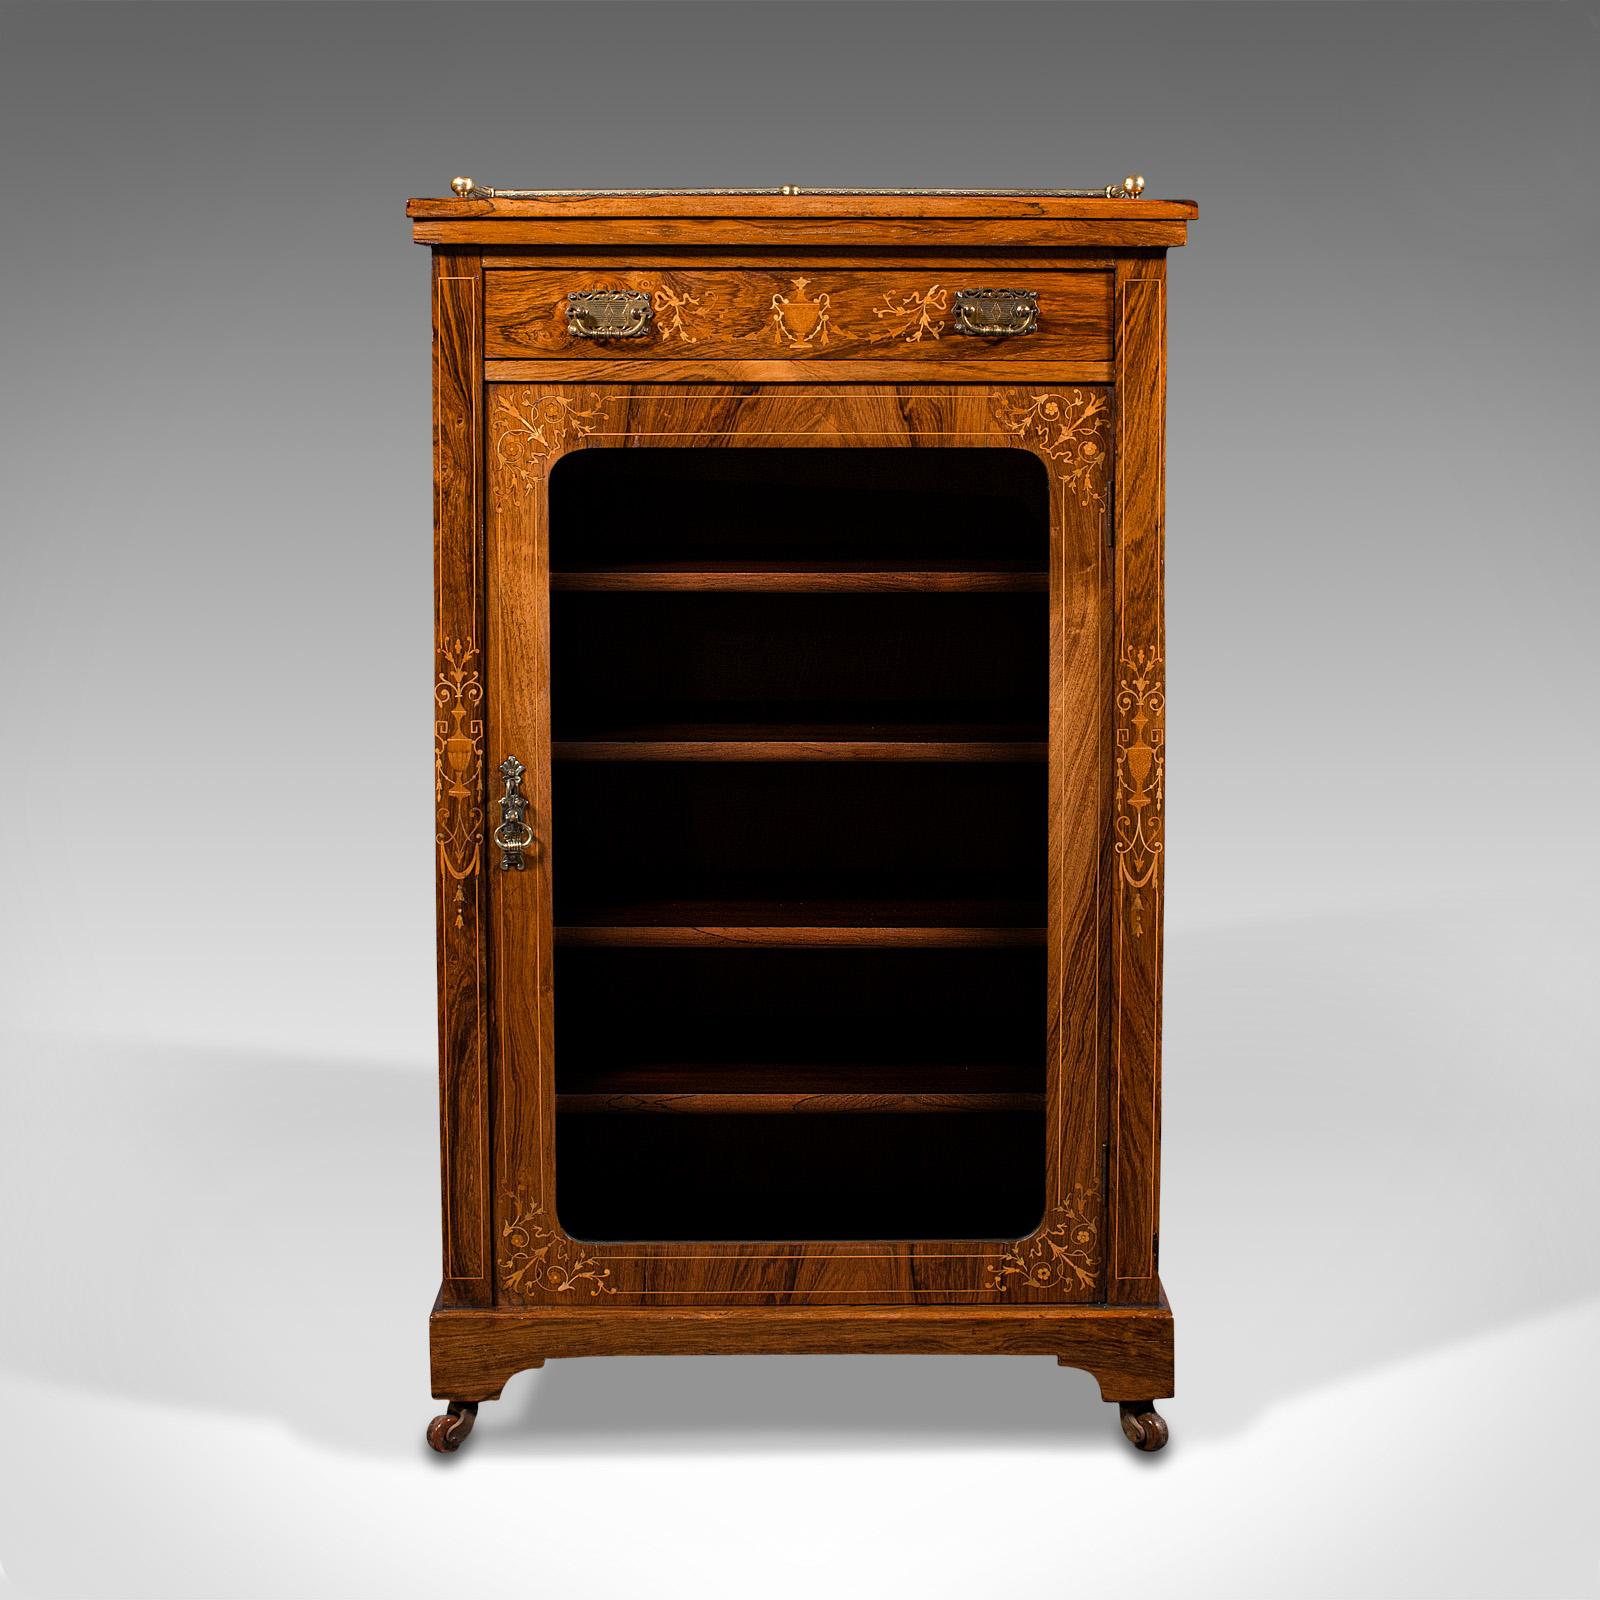 This is an antique music cabinet. An English, rosewood glazed display case with boxwood inlays dating to the late Victorian period, circa 1900.

Superior quality with a highly attractive finish
Displays a desirable aged patina throughout
Select